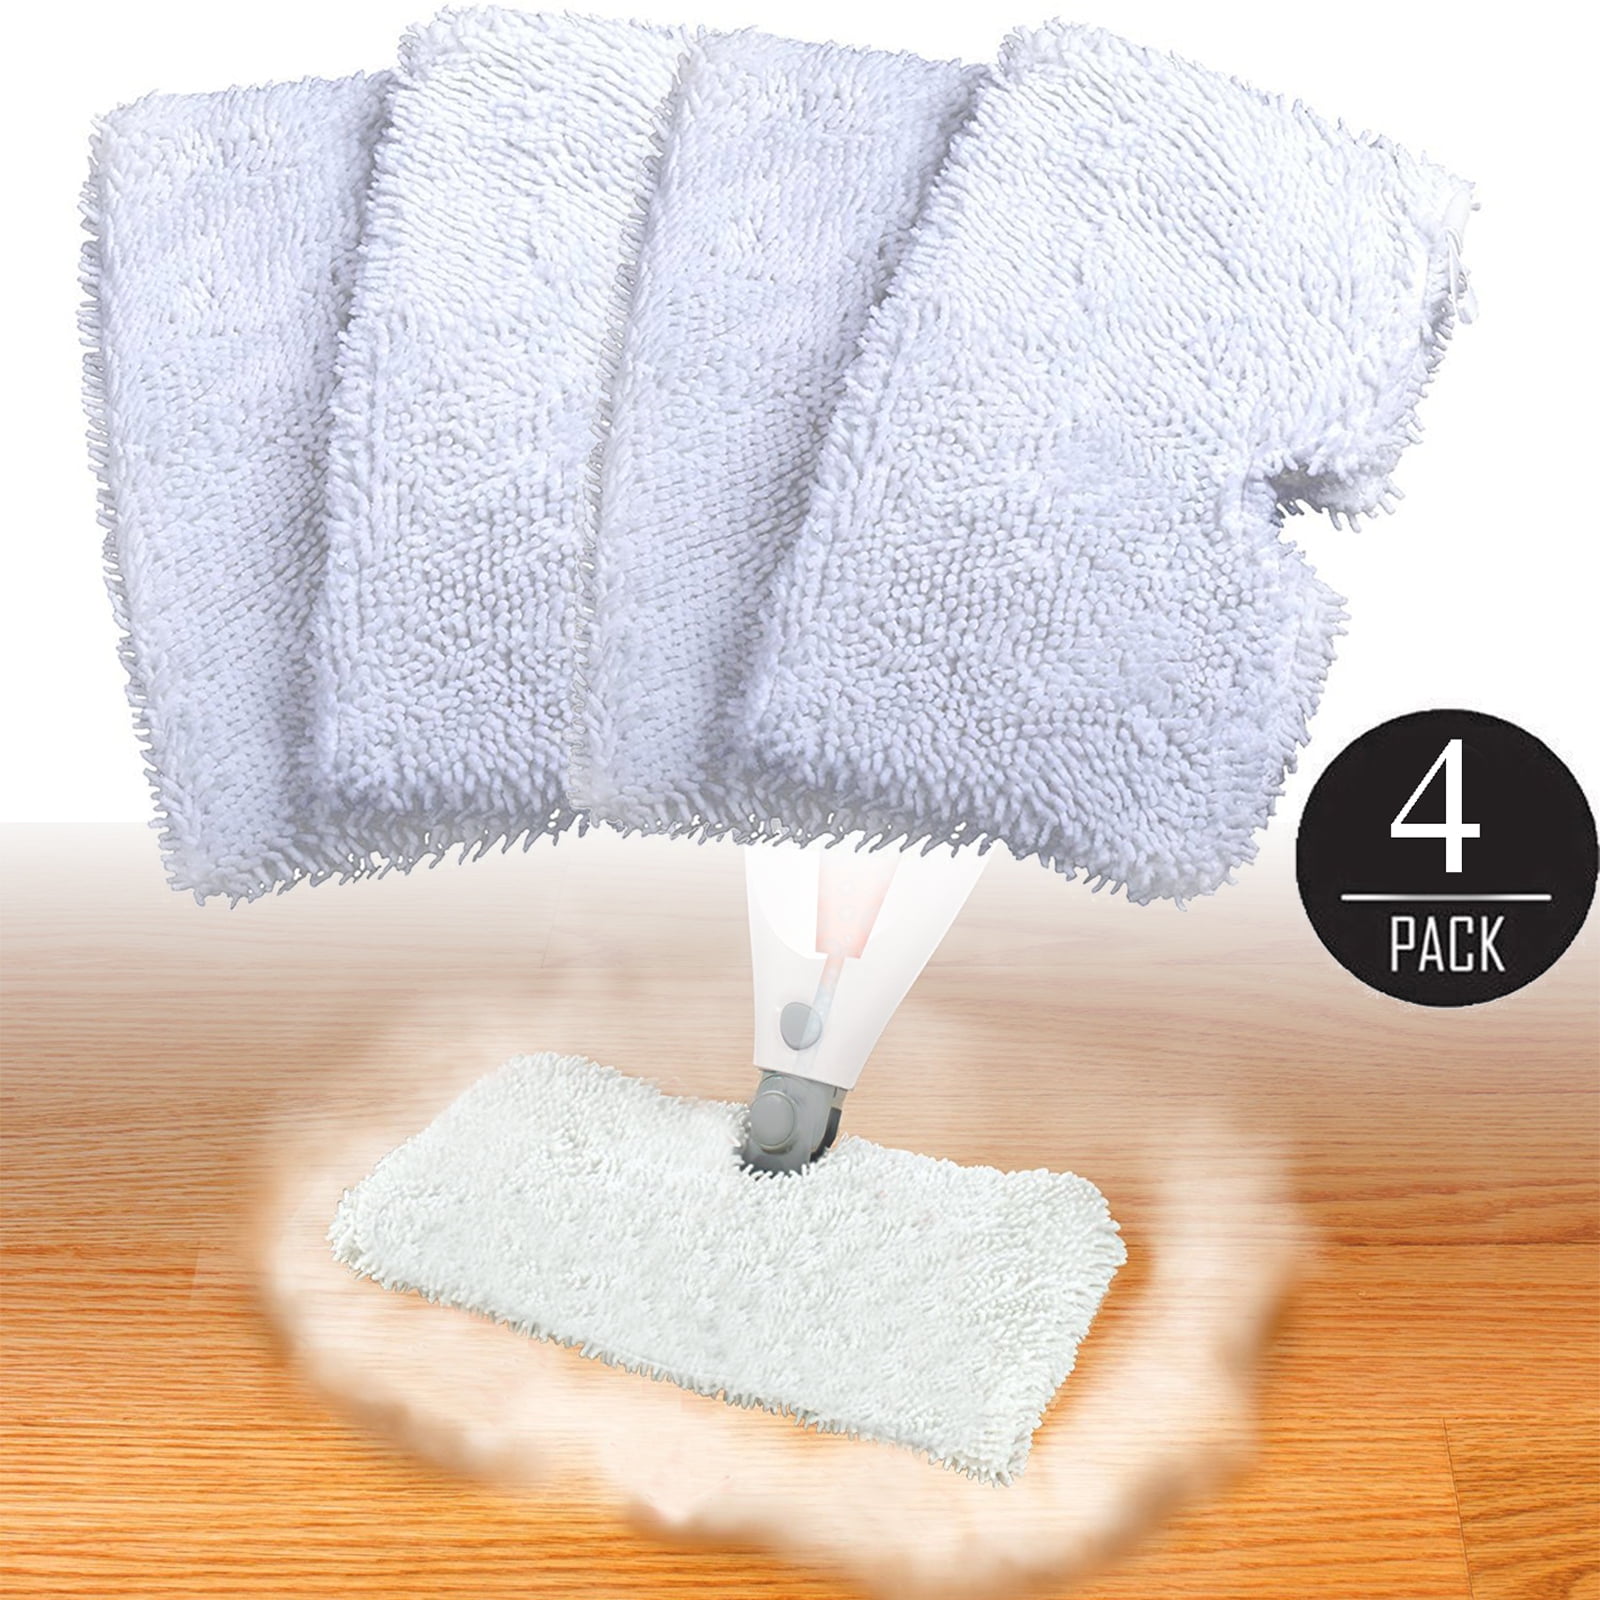 2 Pack Euro-Pro XLT3501 Microfiber Pad Replacement for Shark Steam Pocket Mops 